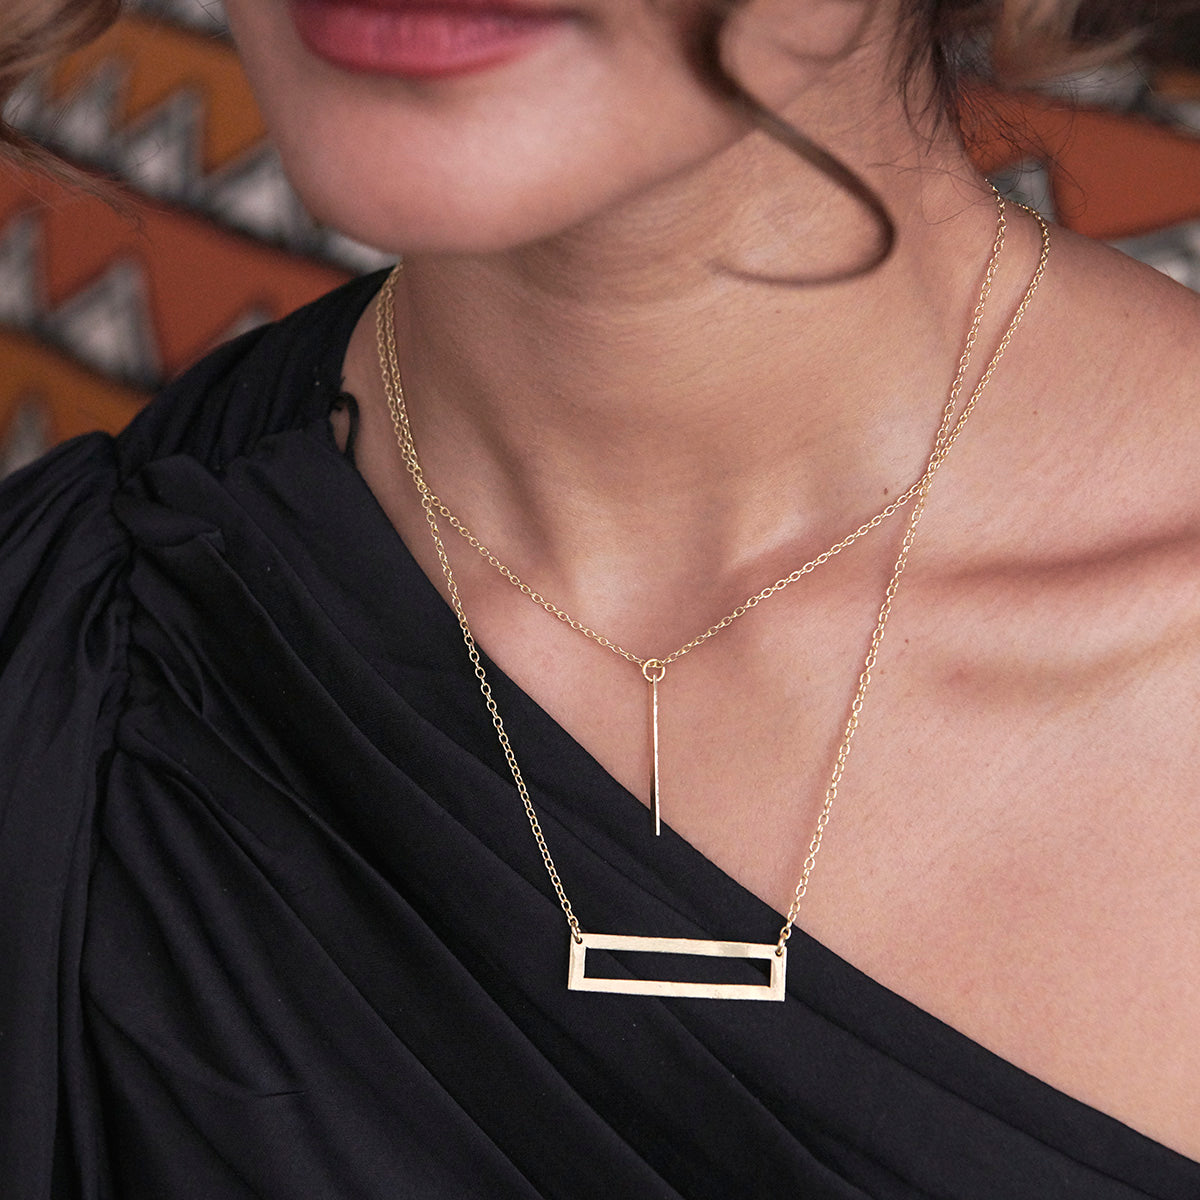 A model wears the Dangling Bar Pendant Necklace.